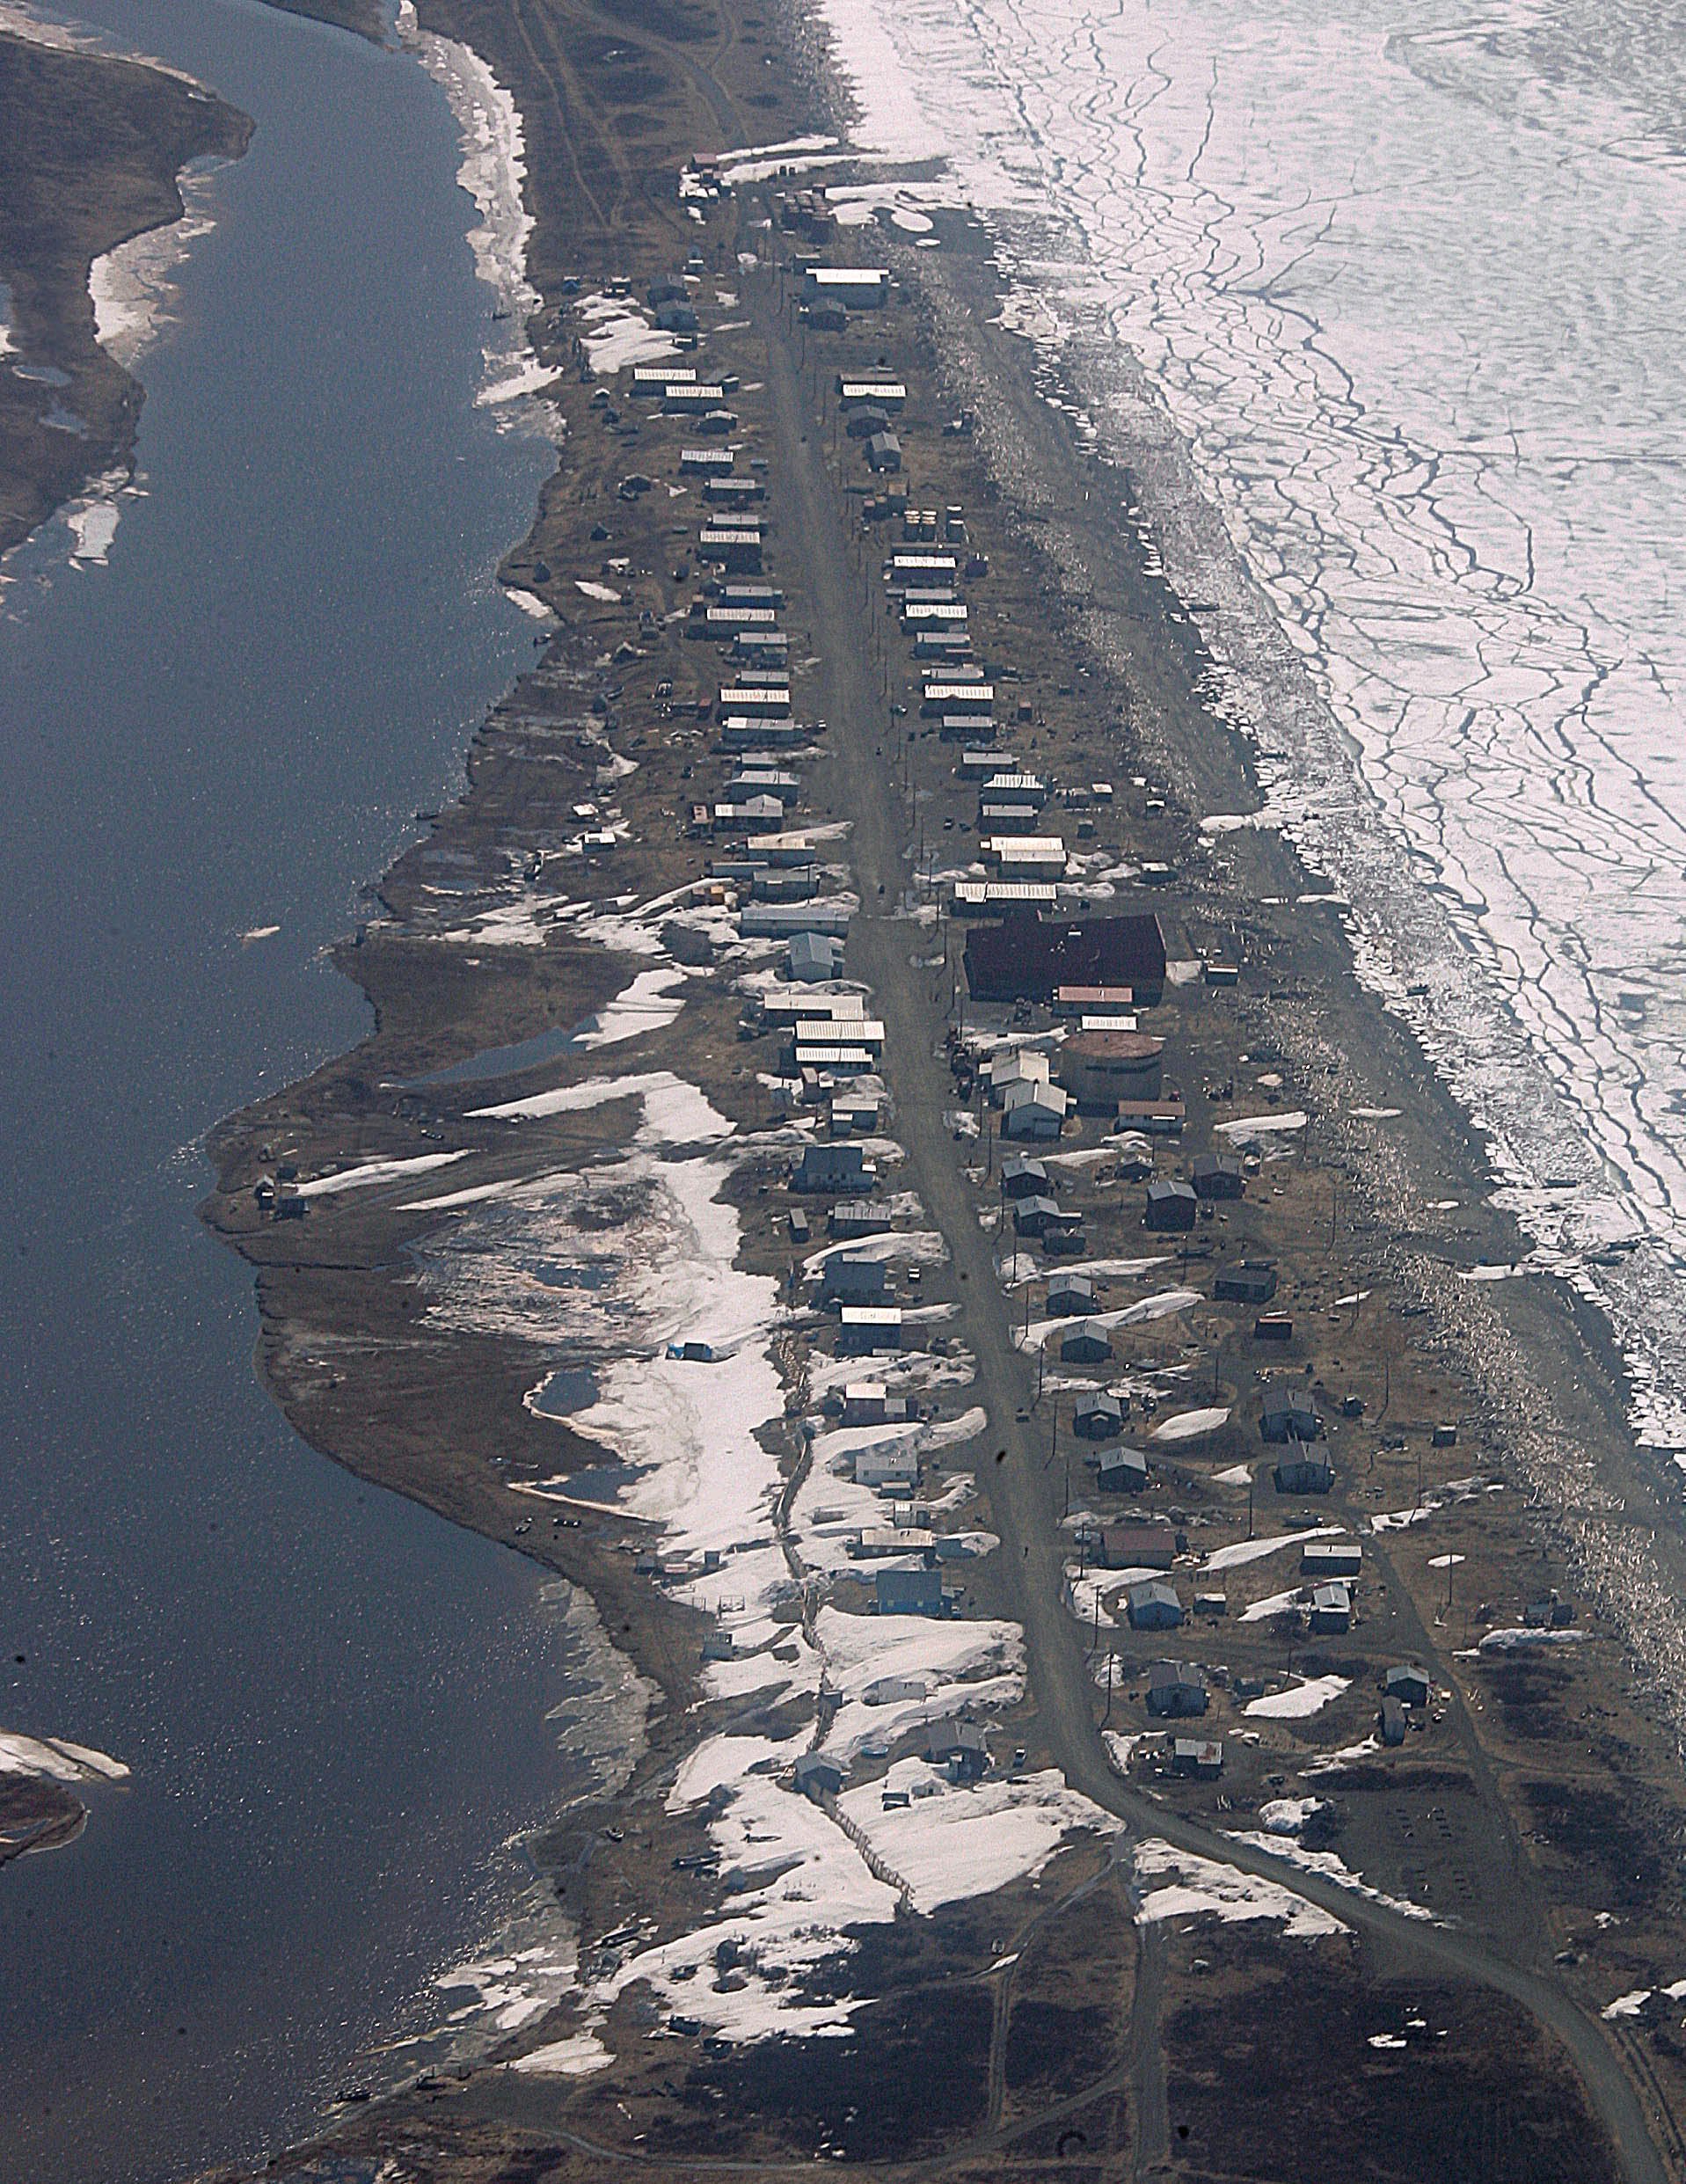 Village of Shaktoolik, Alaska, shown in May 28, 2006. Climate change is causing erosion and other environmental challenges for Alaska communities like this one. (/Al Grillo / AP Photo / File)